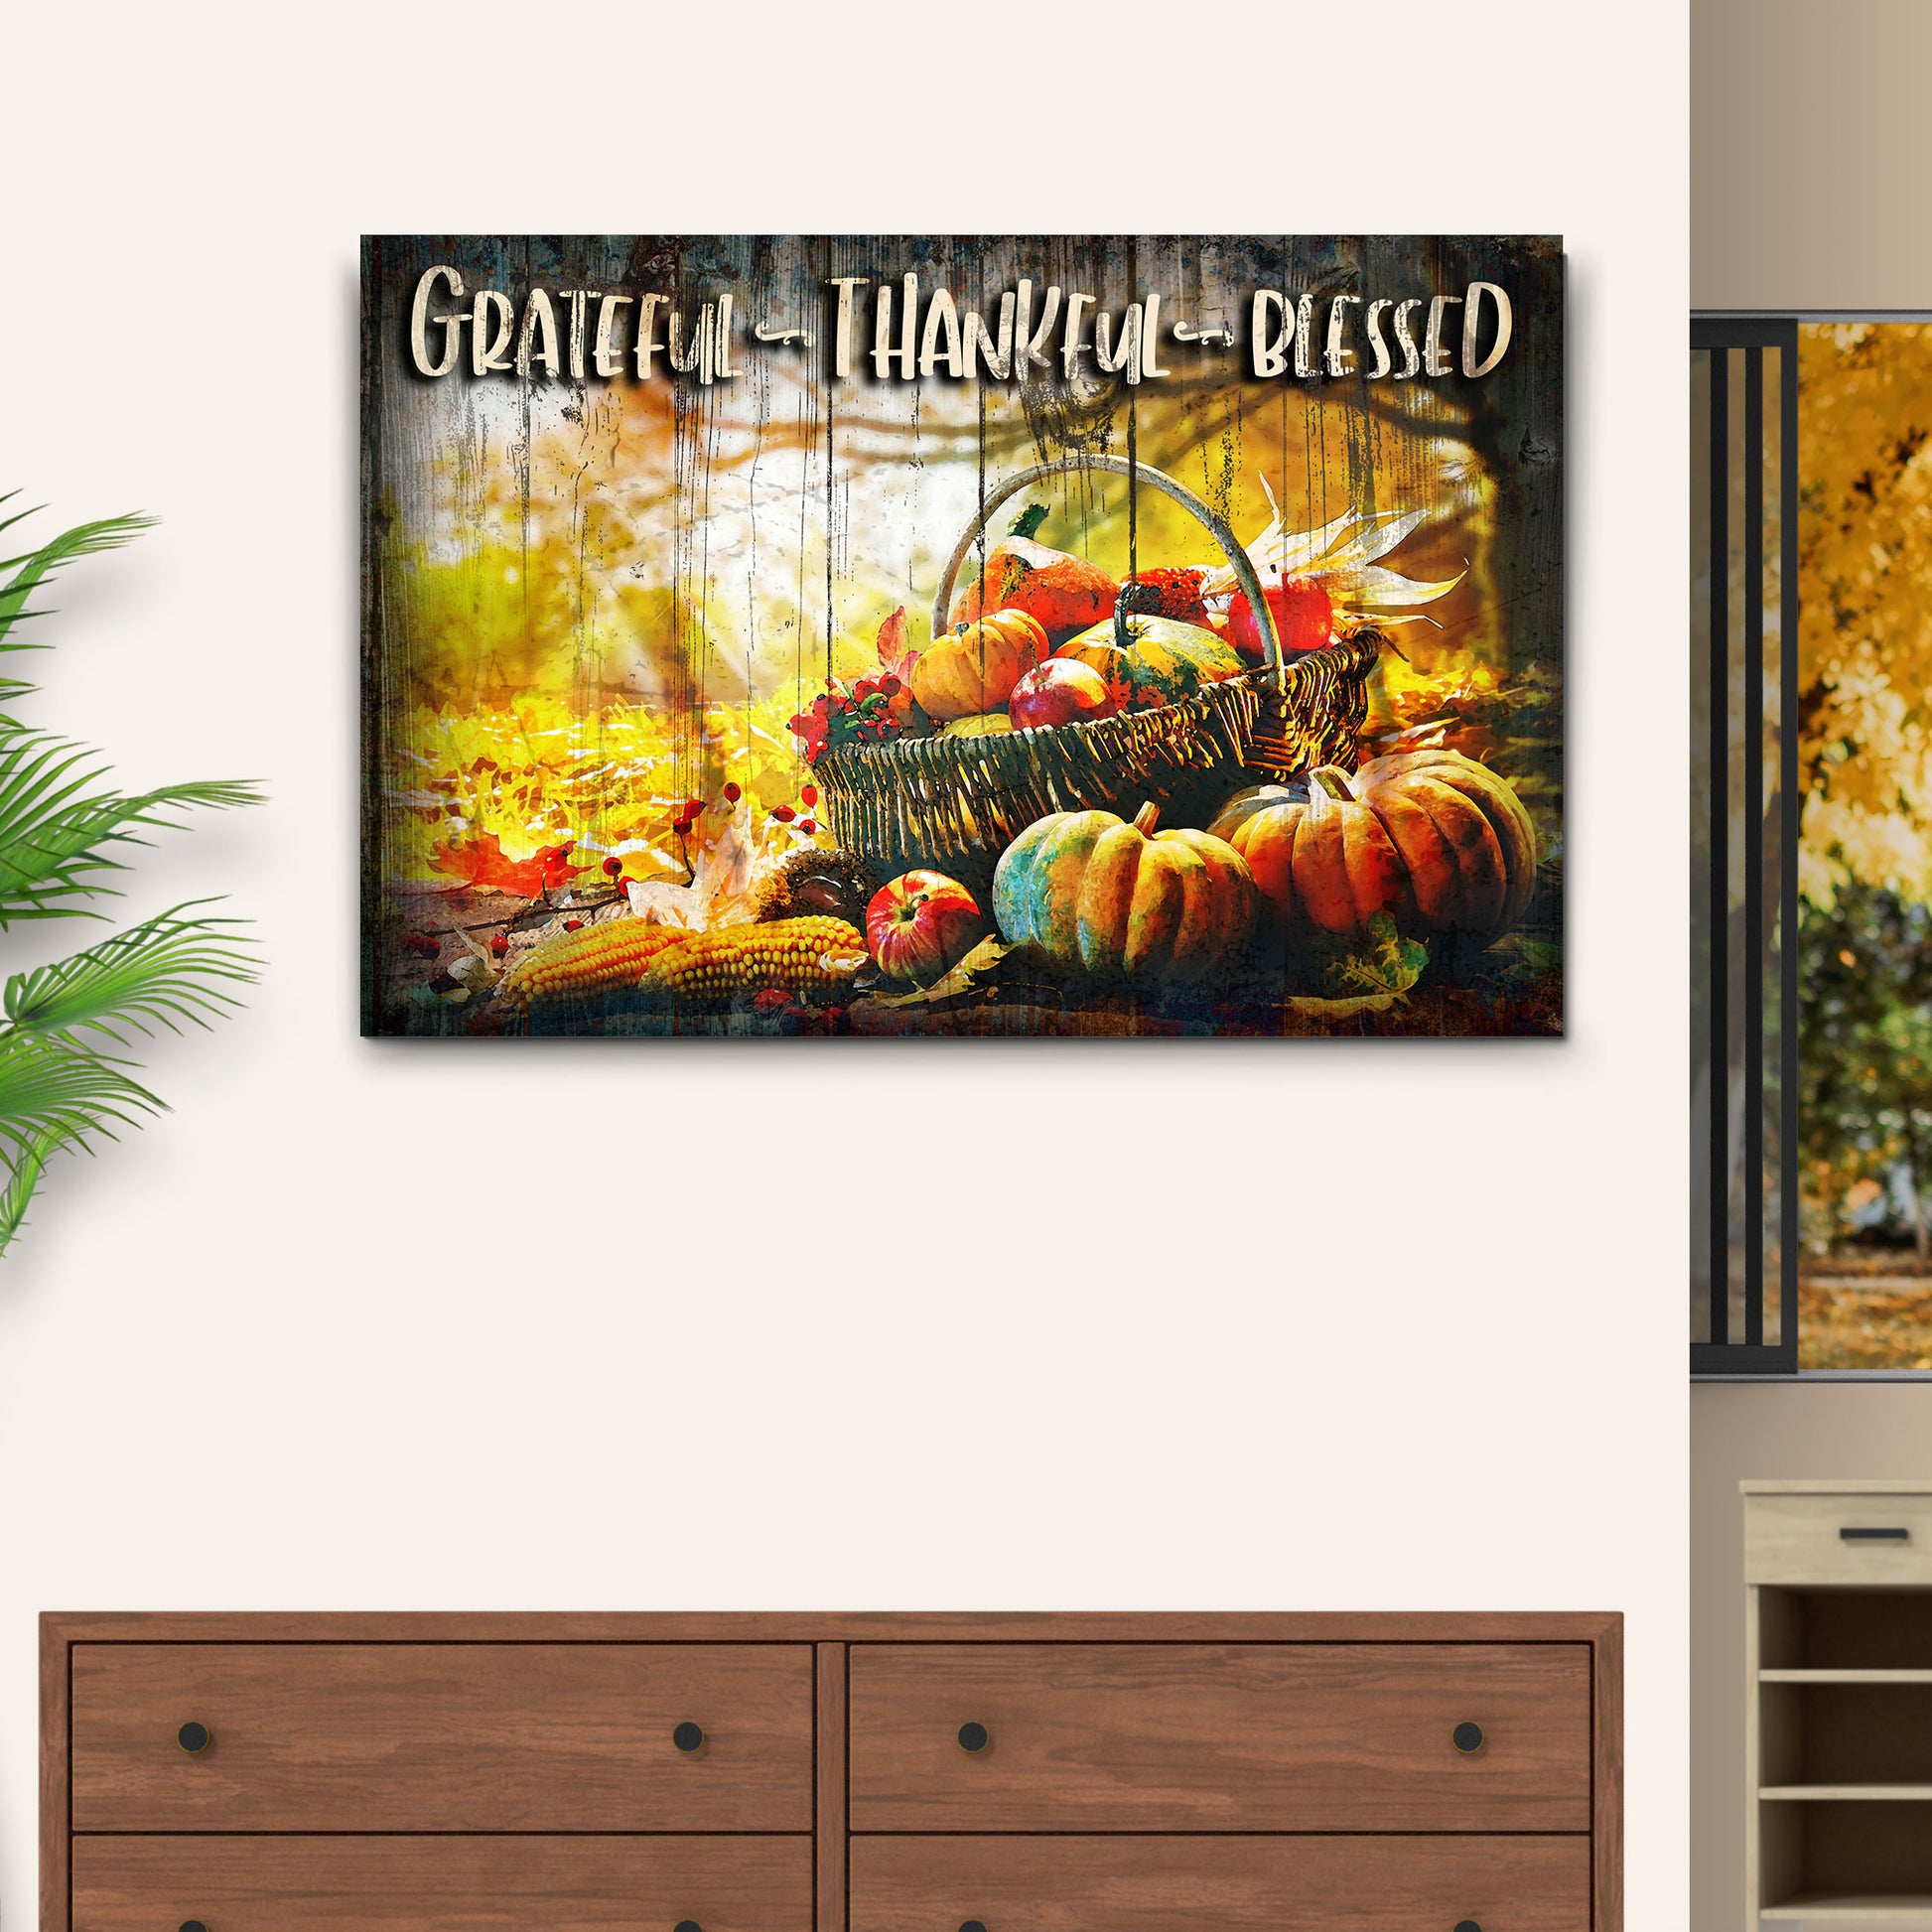 Grateful, Thankful, Blessed Sign III - Image by Tailored Canvases